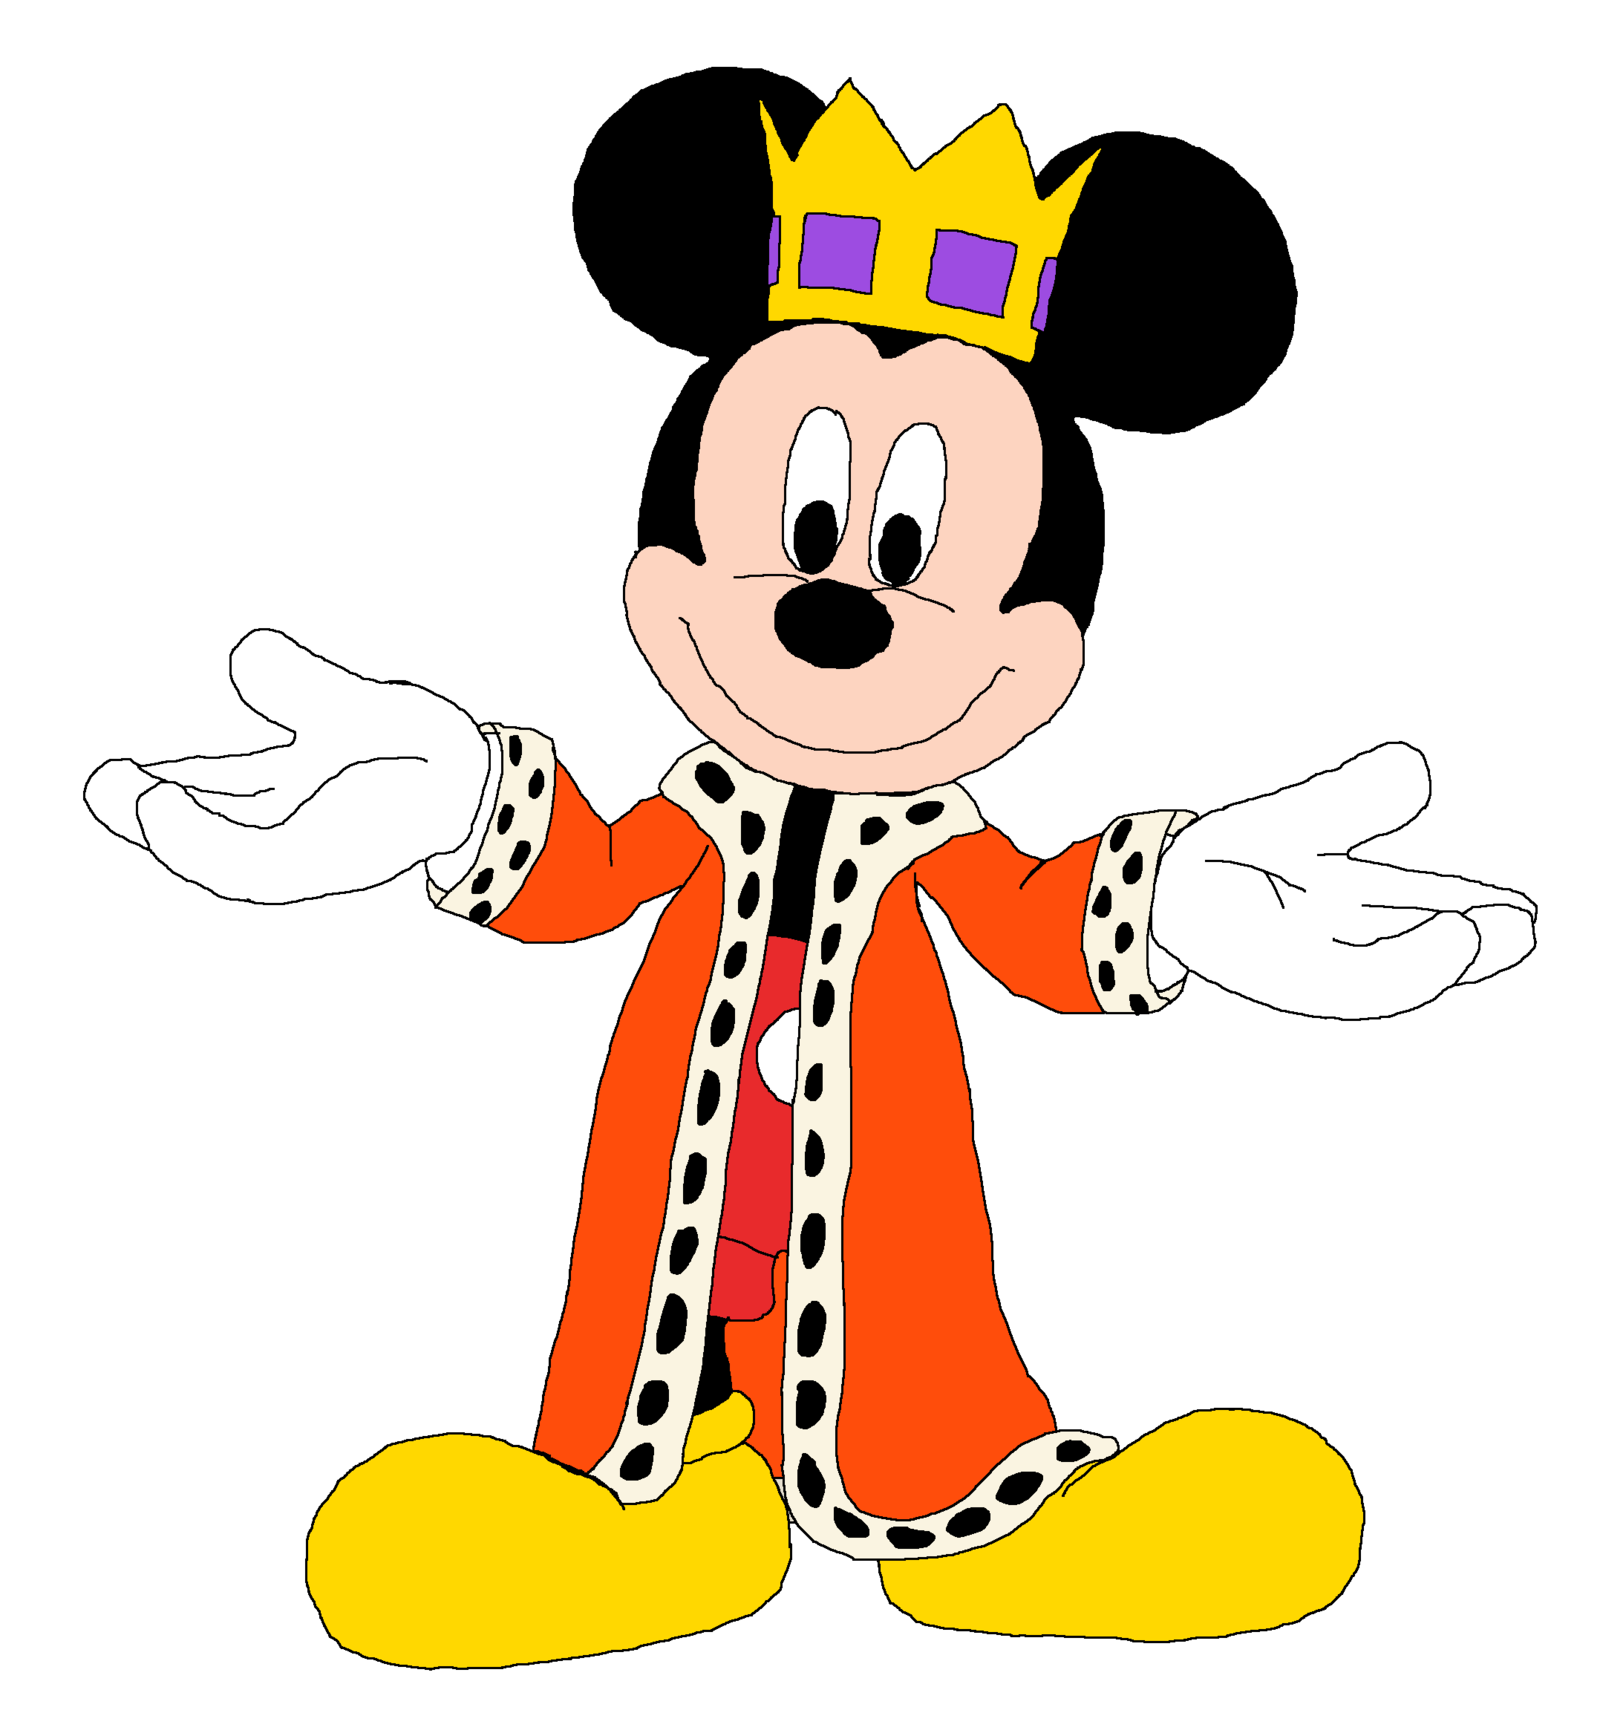 painter clipart mickey mouse